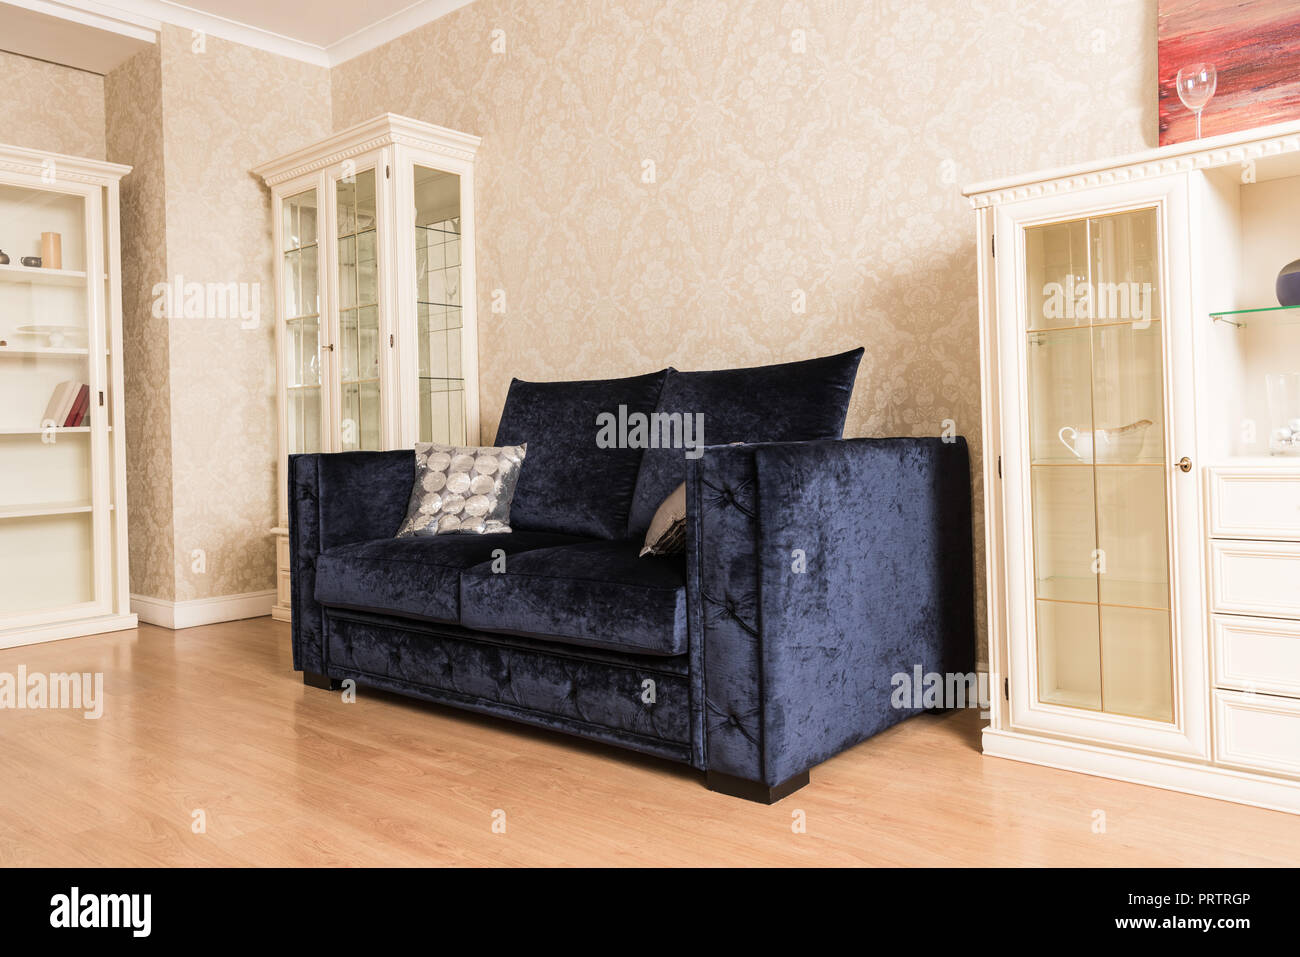 interior of living room with blue sofa, wooden shelves and floor Stock Photo